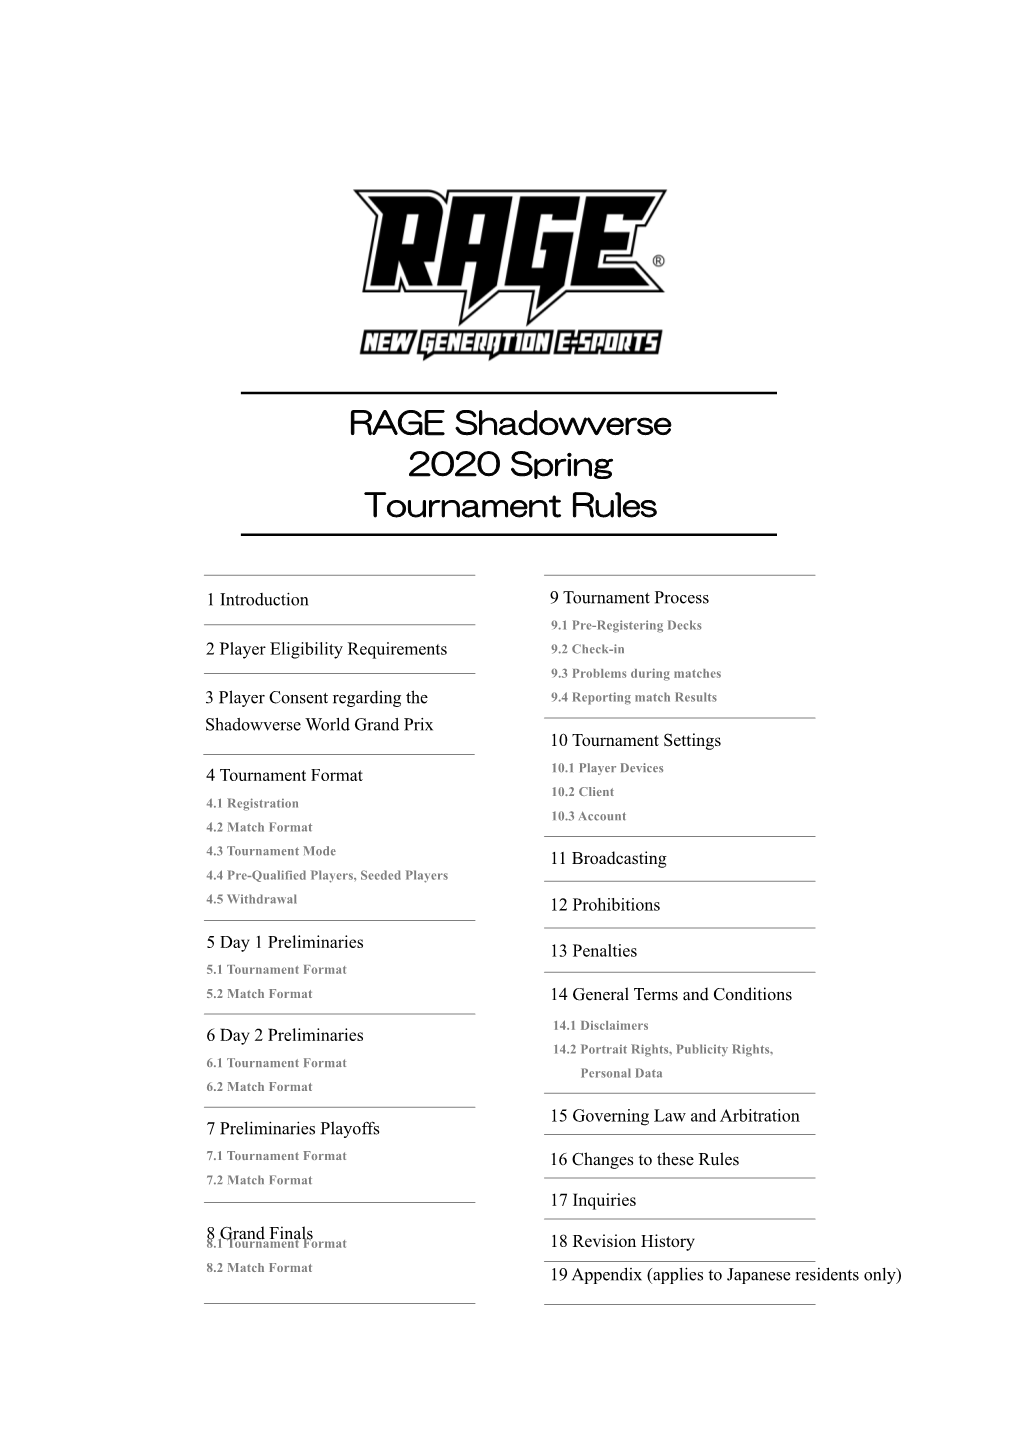 RAGE Shadowverse 2020 Spring Tournament Rules